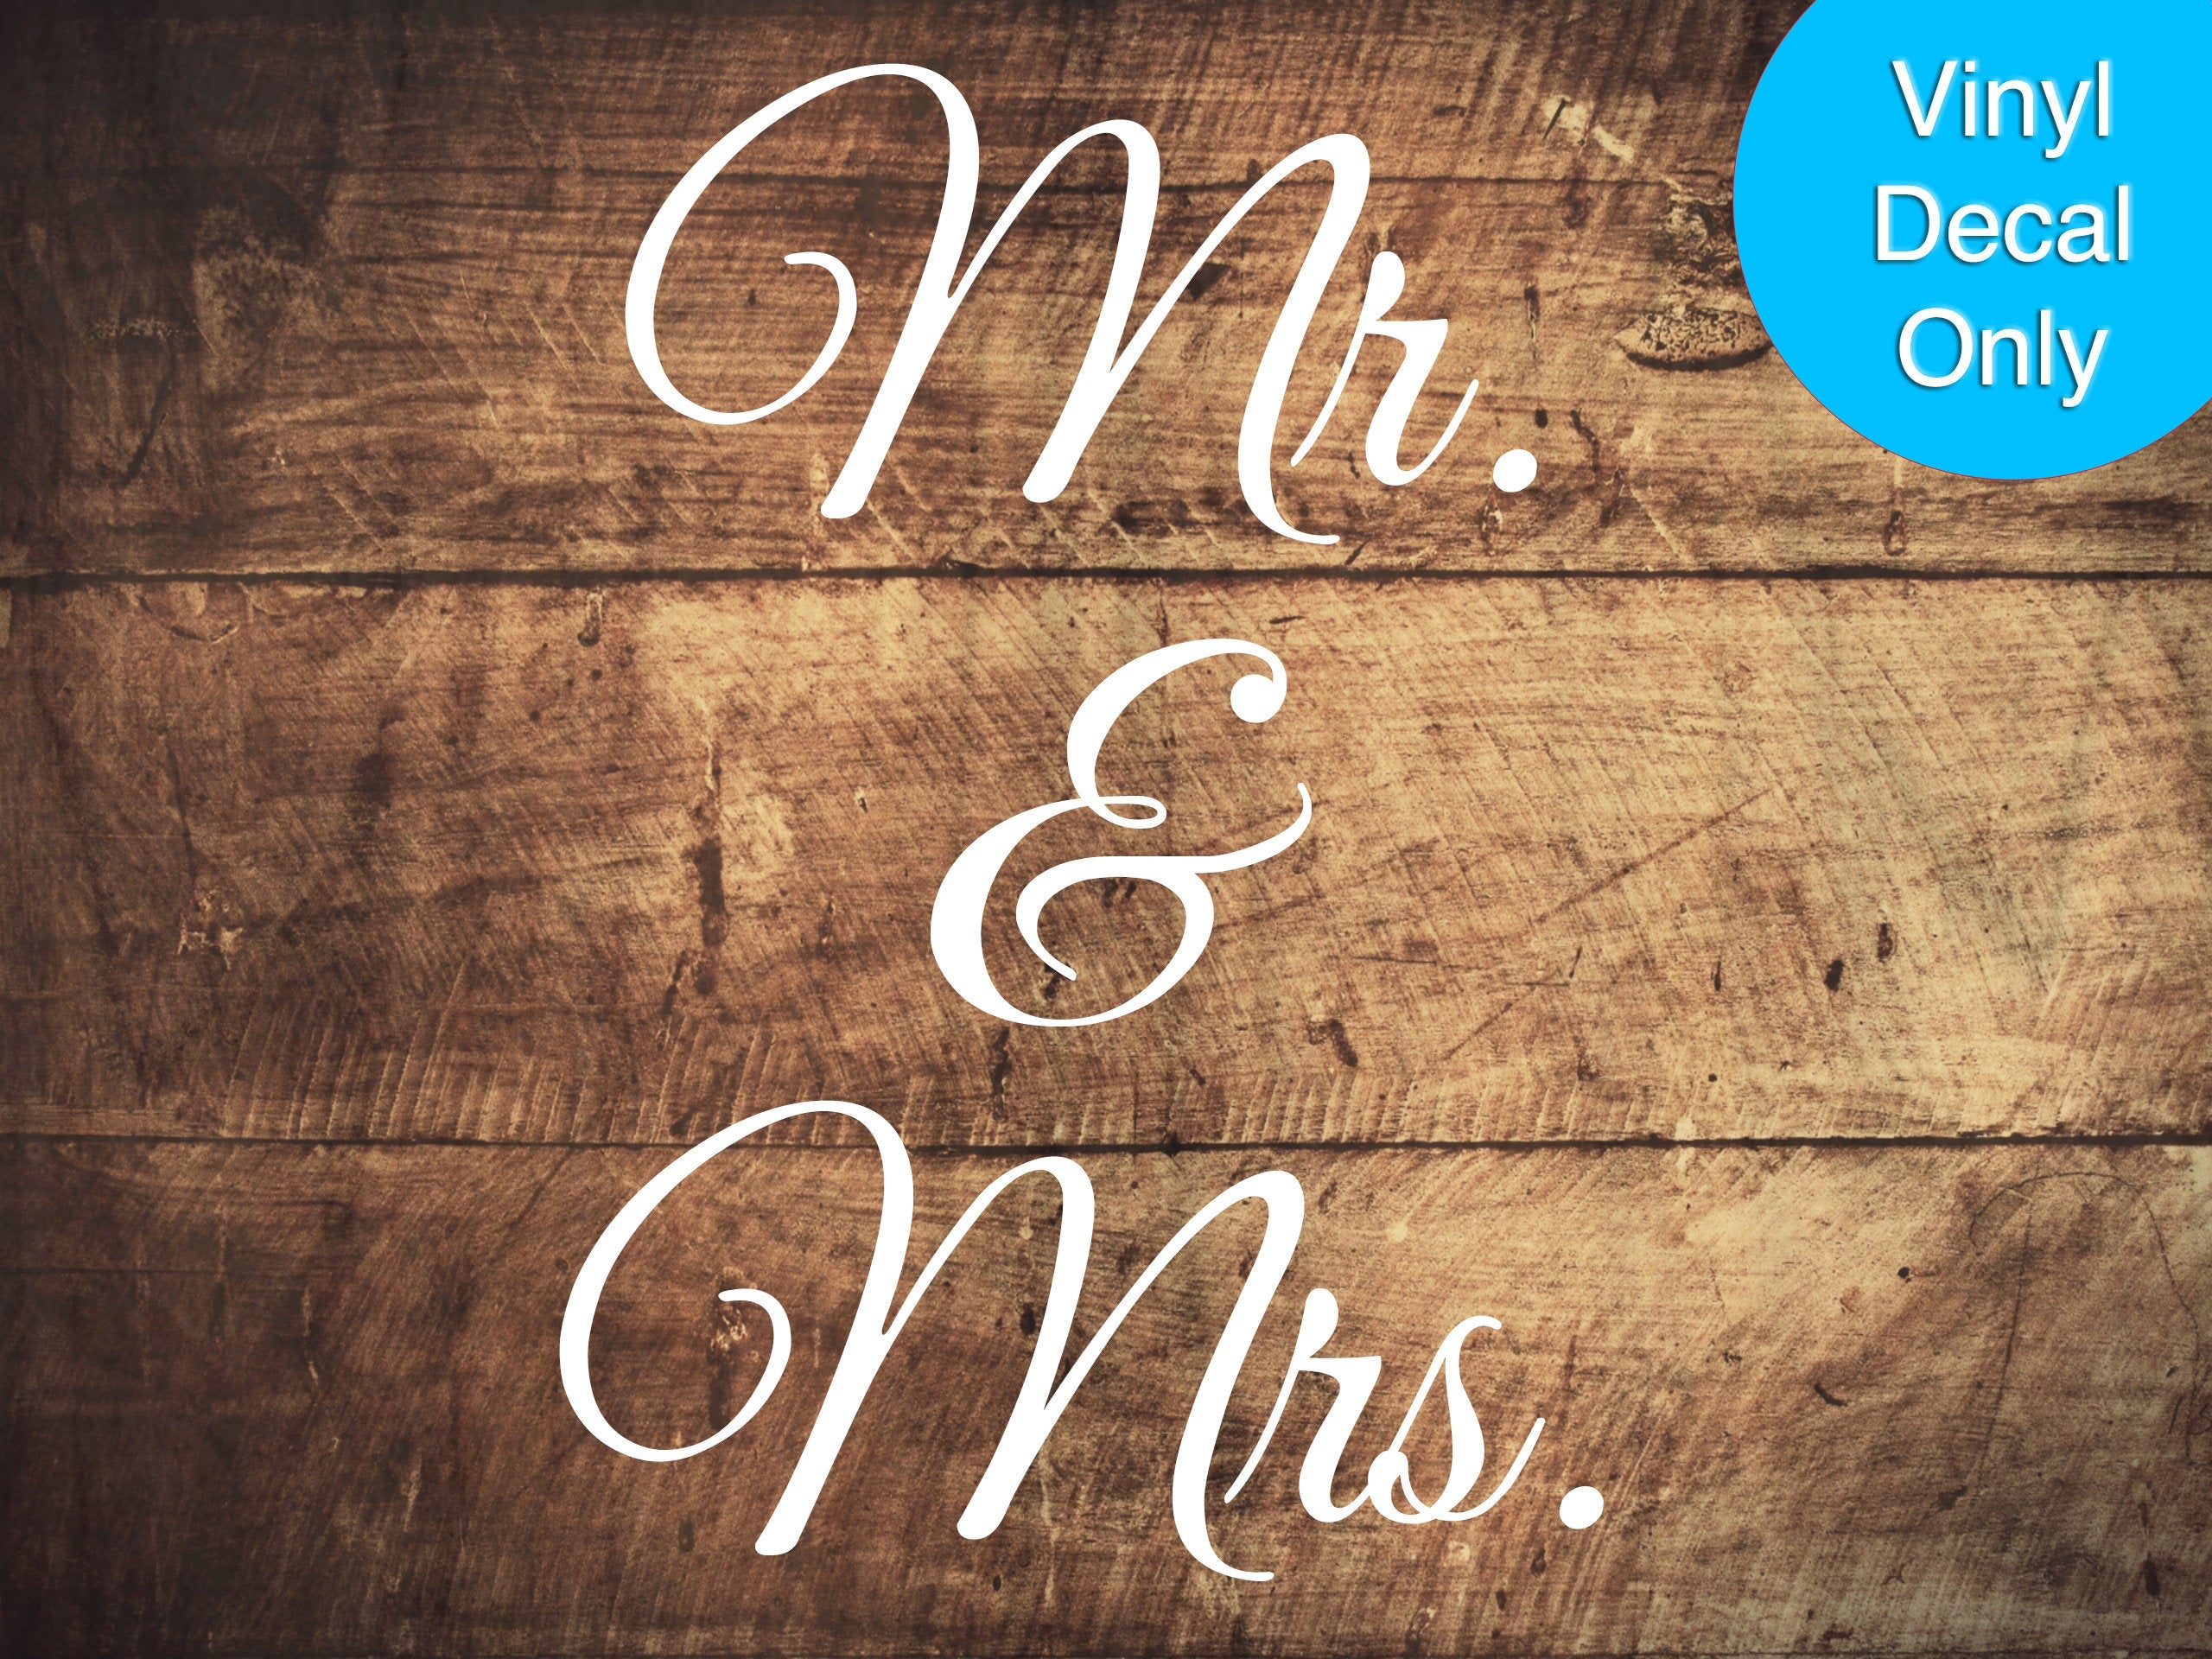 Mr. and Mrs. - Wedding Bride and Groom Sticky Vinyl Decal for DIY Signs, Wedding Ceremony, Reception Decor, Engagement Party